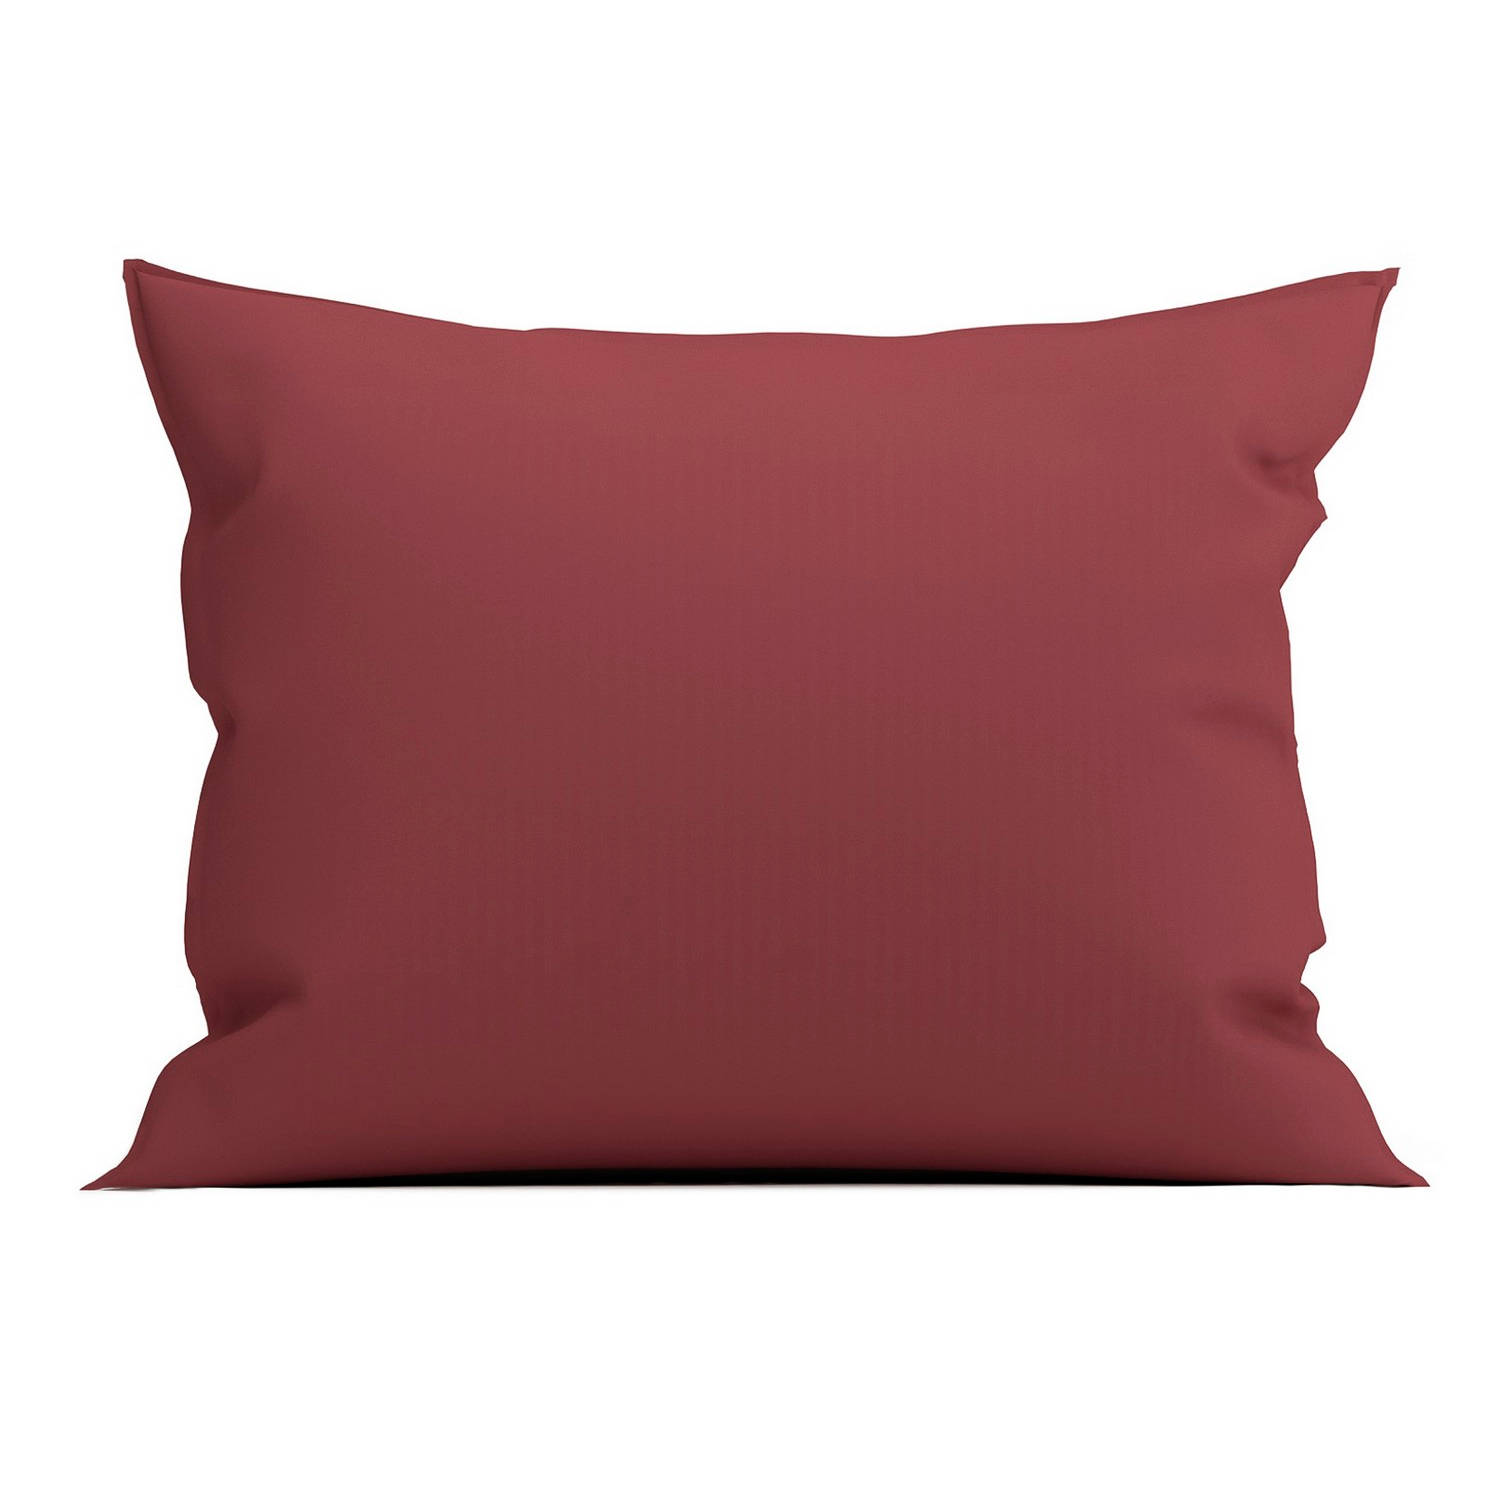 Yellow Percale Kussensloop - Percale - 60x70cm - Rood